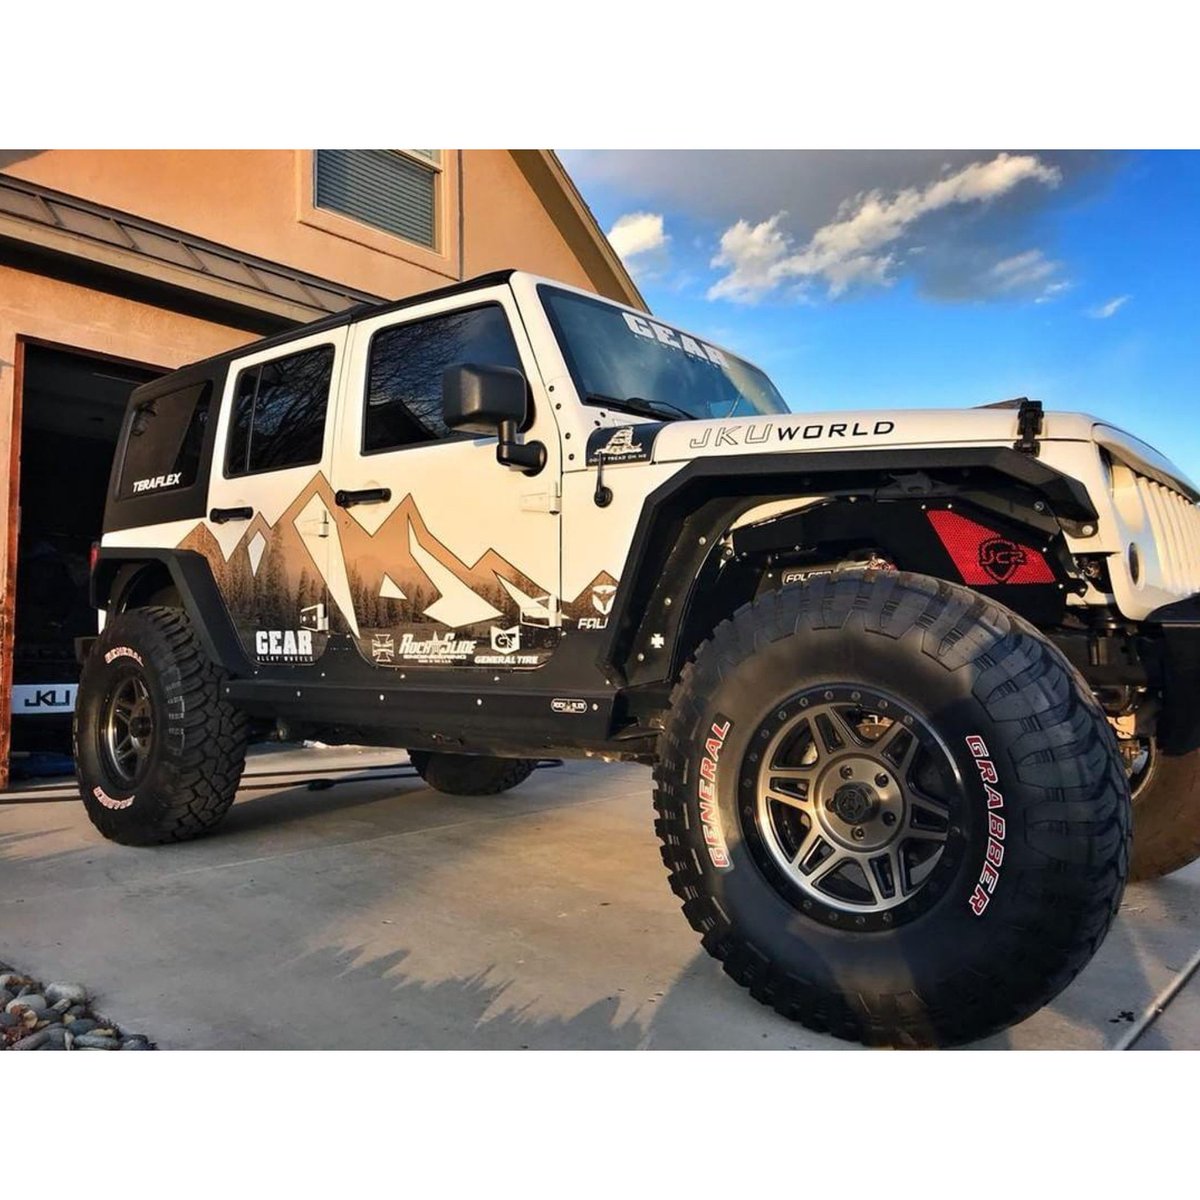 Love those wheels, what do you think?
#jeeps #jeepwheels